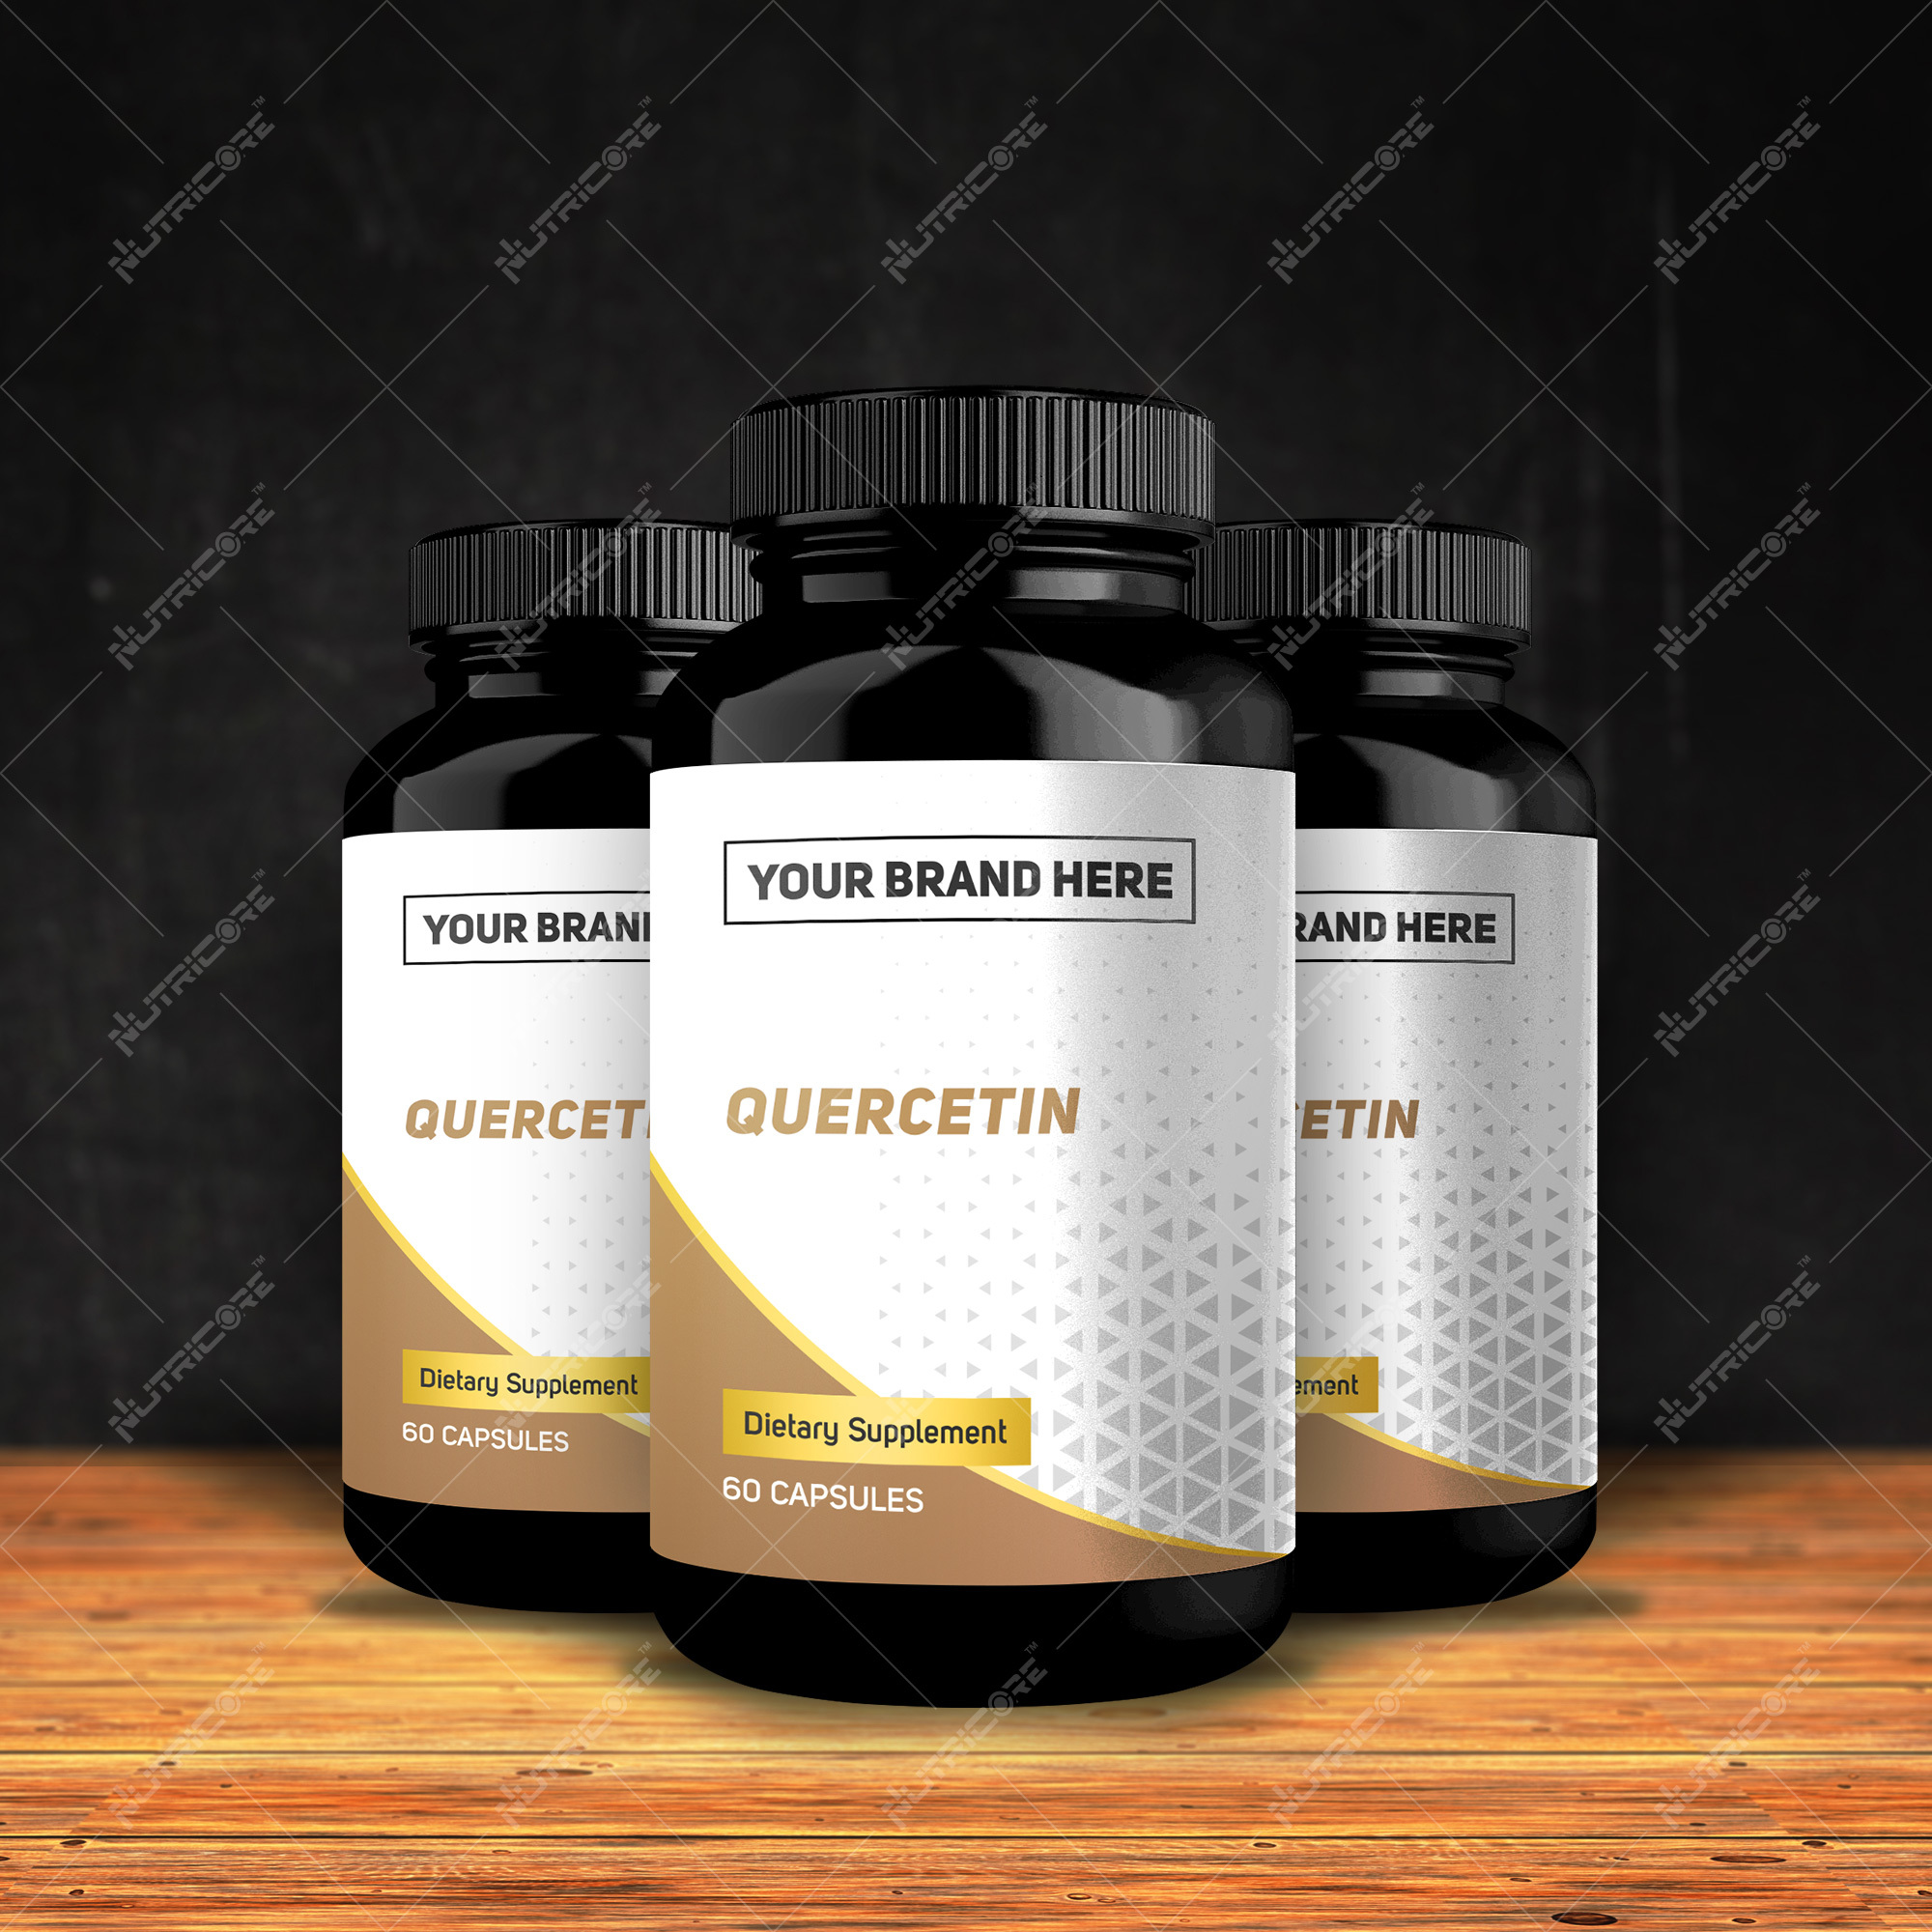 Private Labele for Quercetin Suppliments.